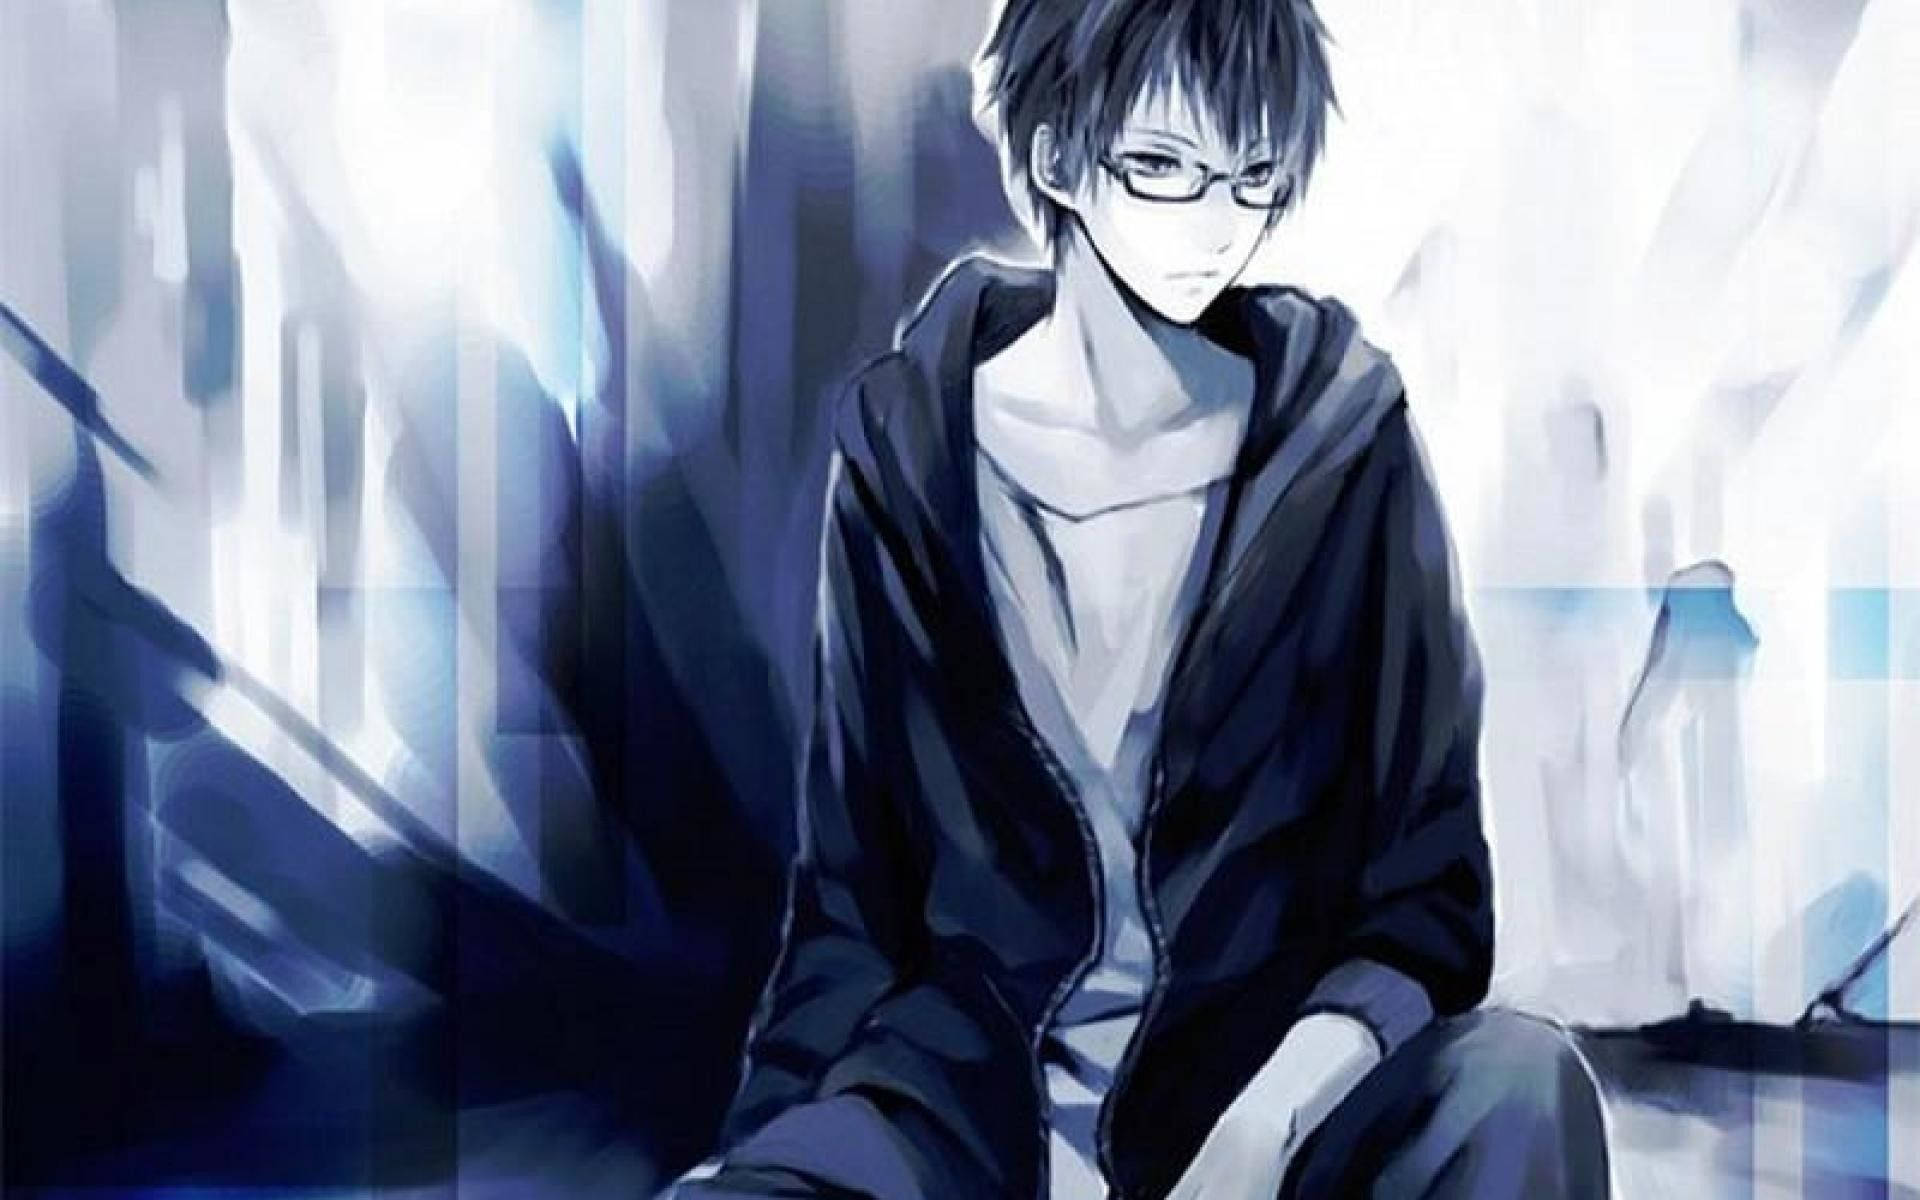 Download Nerdy Anime Boy With Glasses Wallpaper 